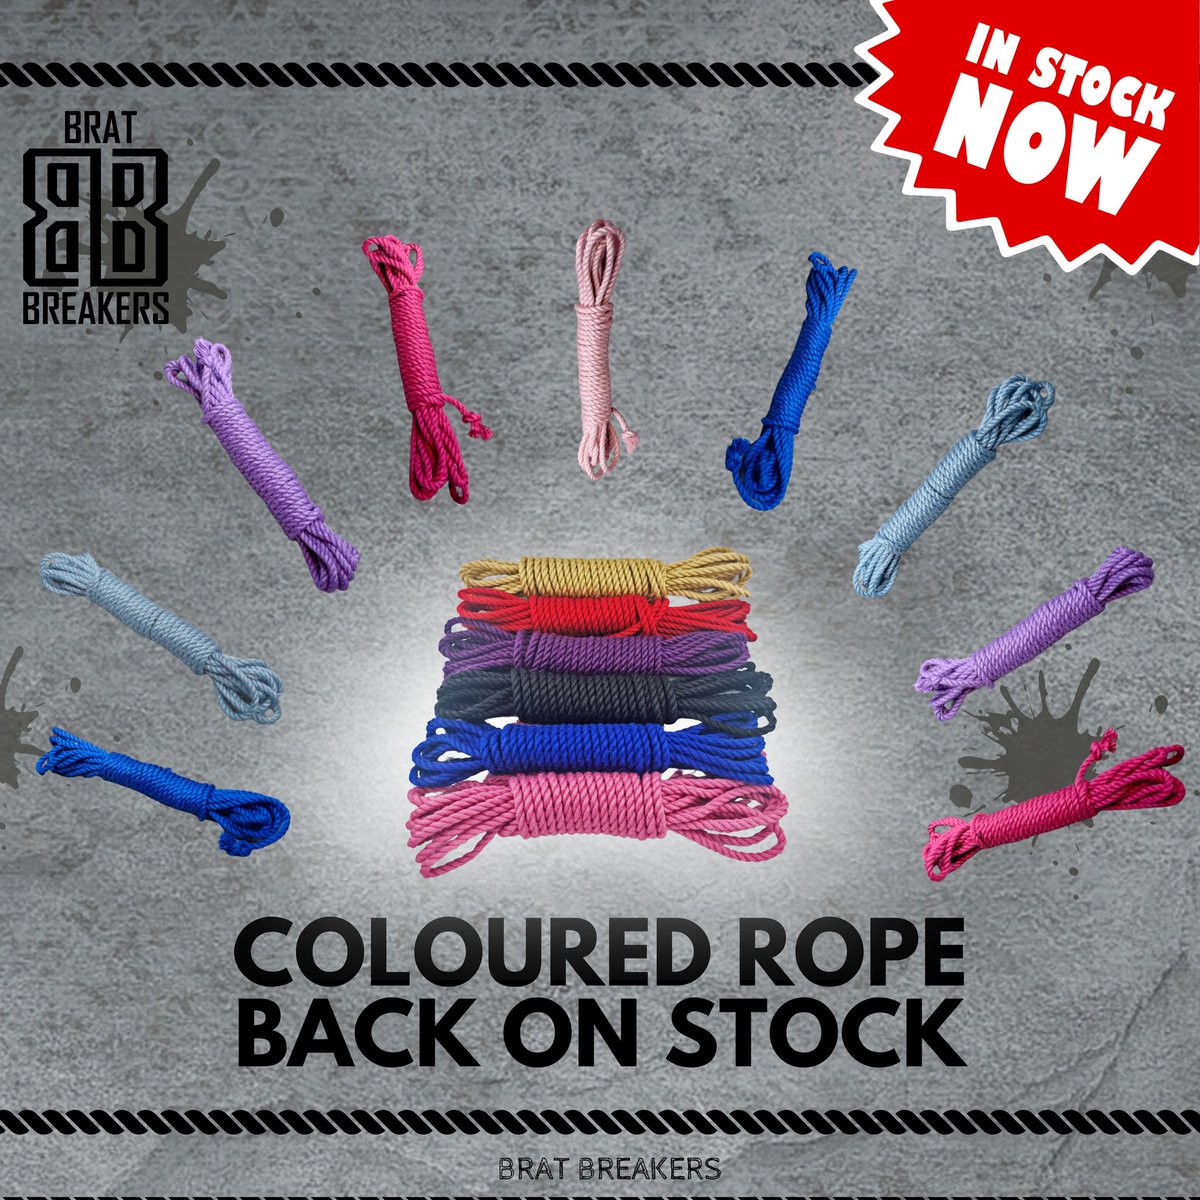 🌈 Our colored jute rope is back in stock! 
🎉 Explore over 10 vibrant color options to add some excitement to your rope play! 
🌟 Hurry, they're selling fast - grab yours before they run out again! ⏳ 

#perthfetishcommunity 
#perthkink
#ropes
#shibari 
#LimitedAvailability